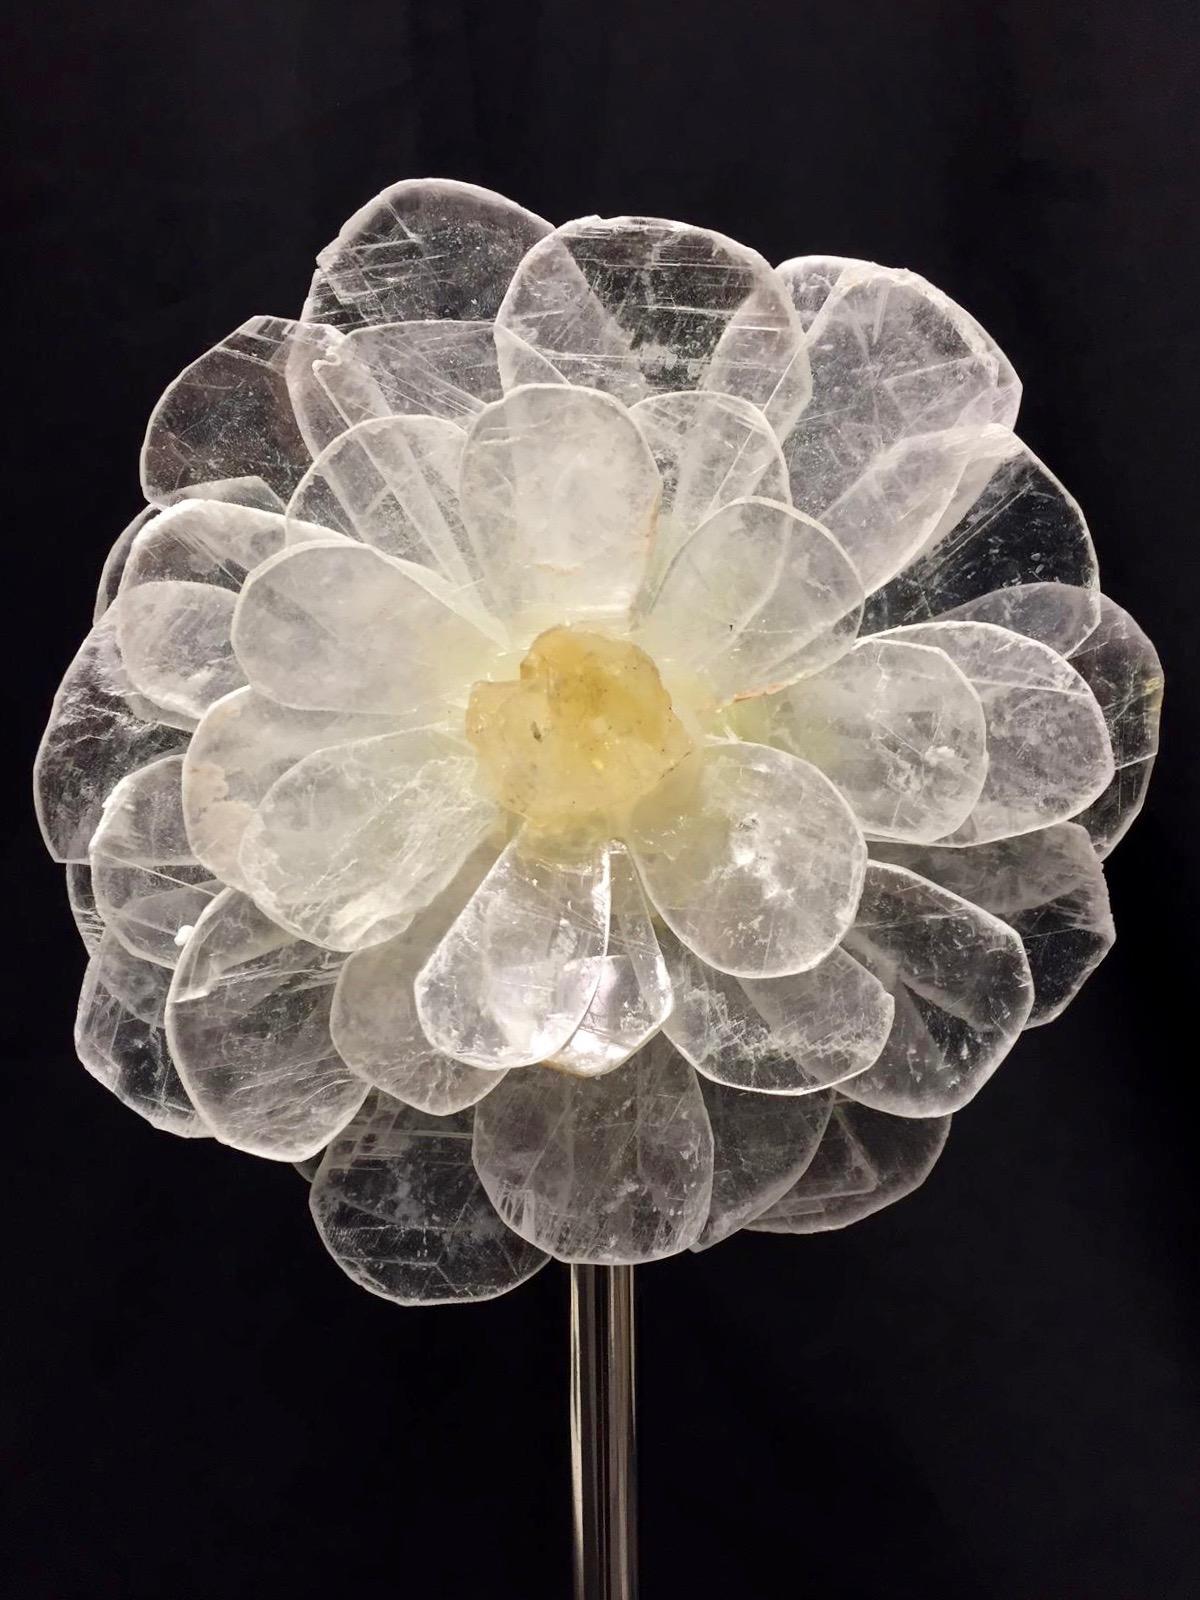 Set of three decorative flowers on marble stands. Each flower is made out of the gemstone Selenite. The center stones are Amethyst Quartz and Citrine Quartz. Overall heights are 21